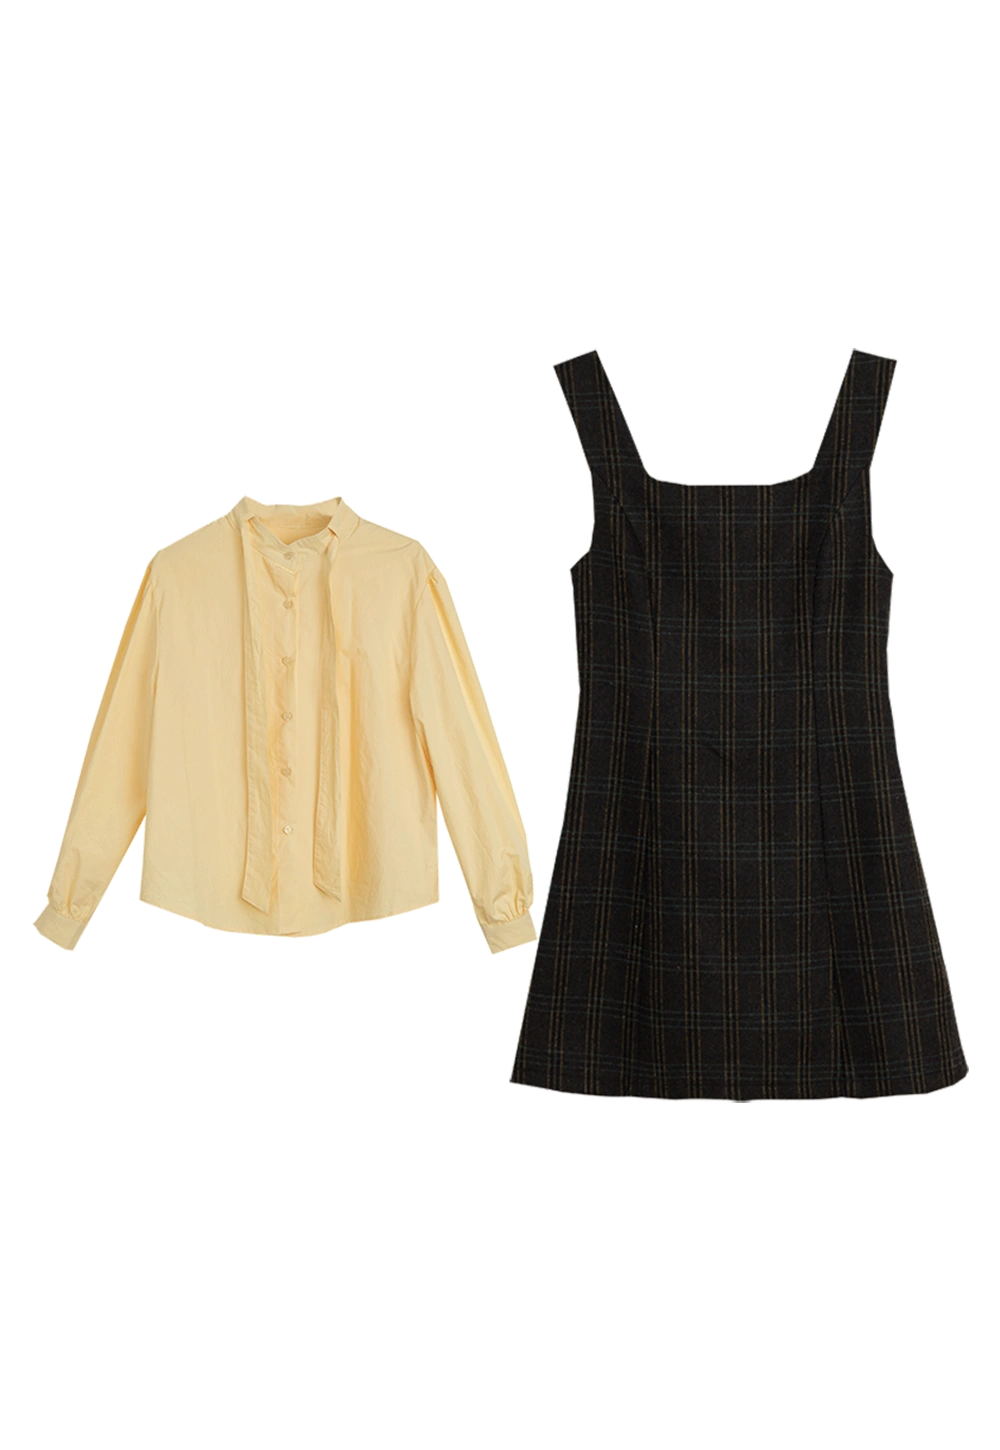 Women's Two-Piece Set: Long Sleeve Yellow Blouse and Black Plaid Pinafore Dress